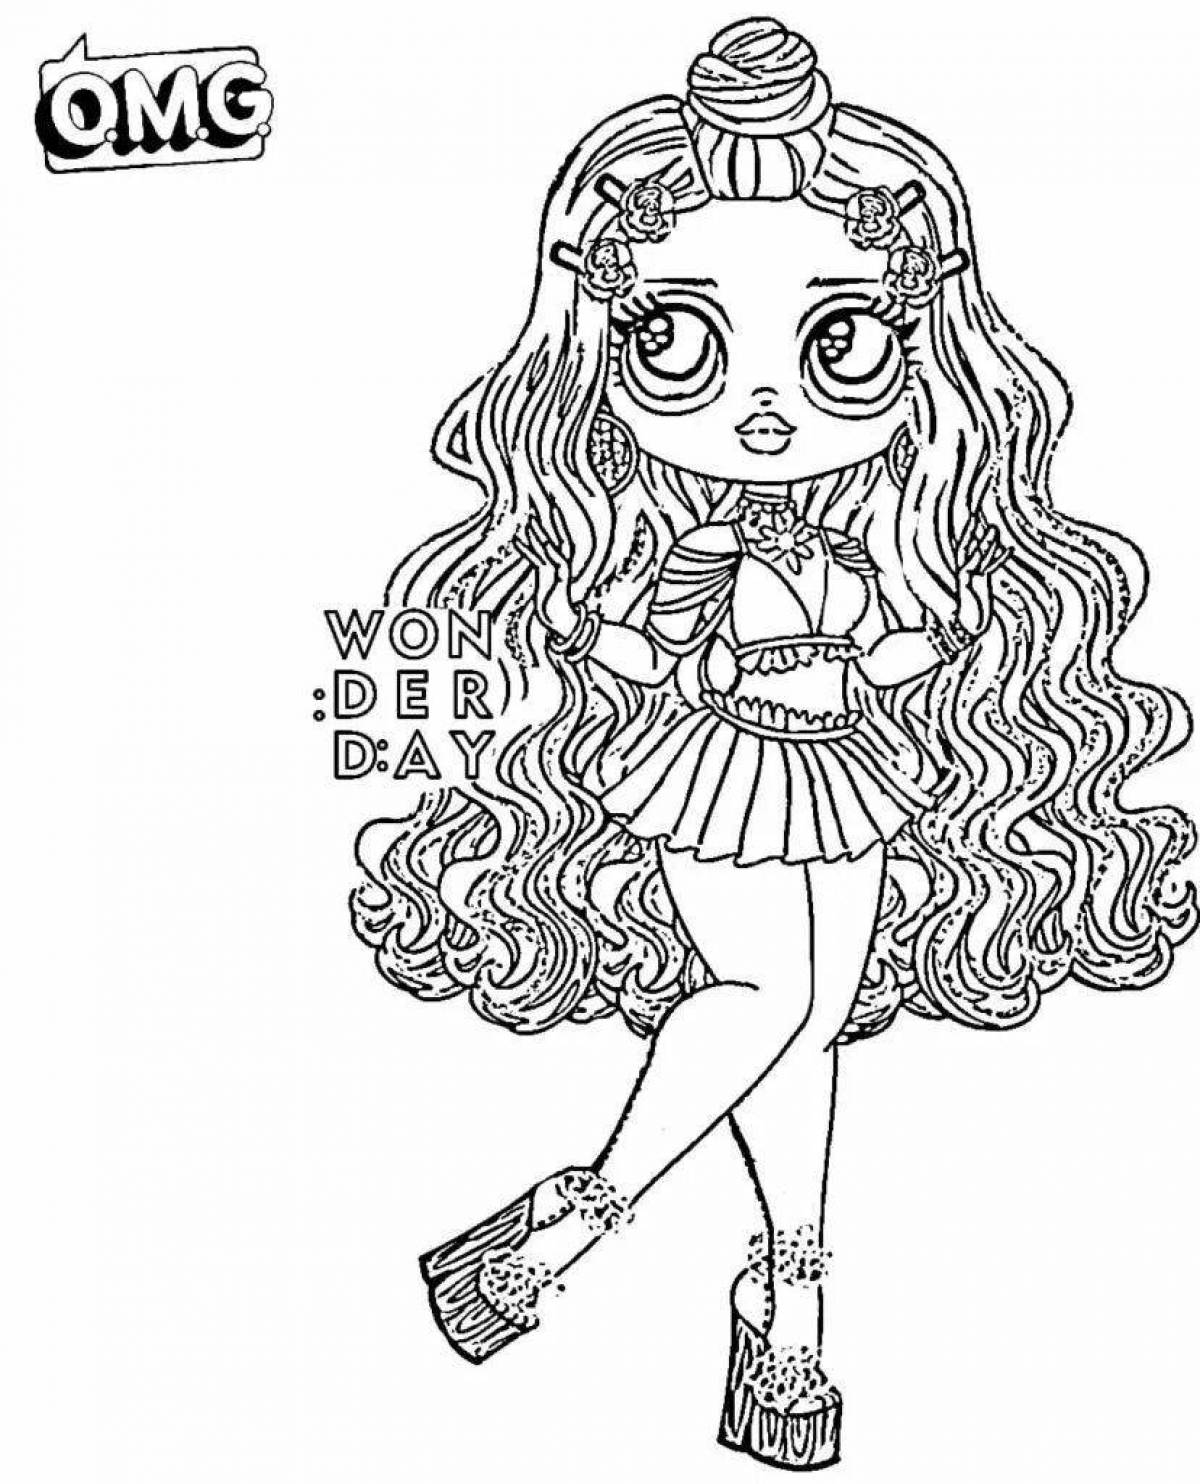 Little omg doll coloring book